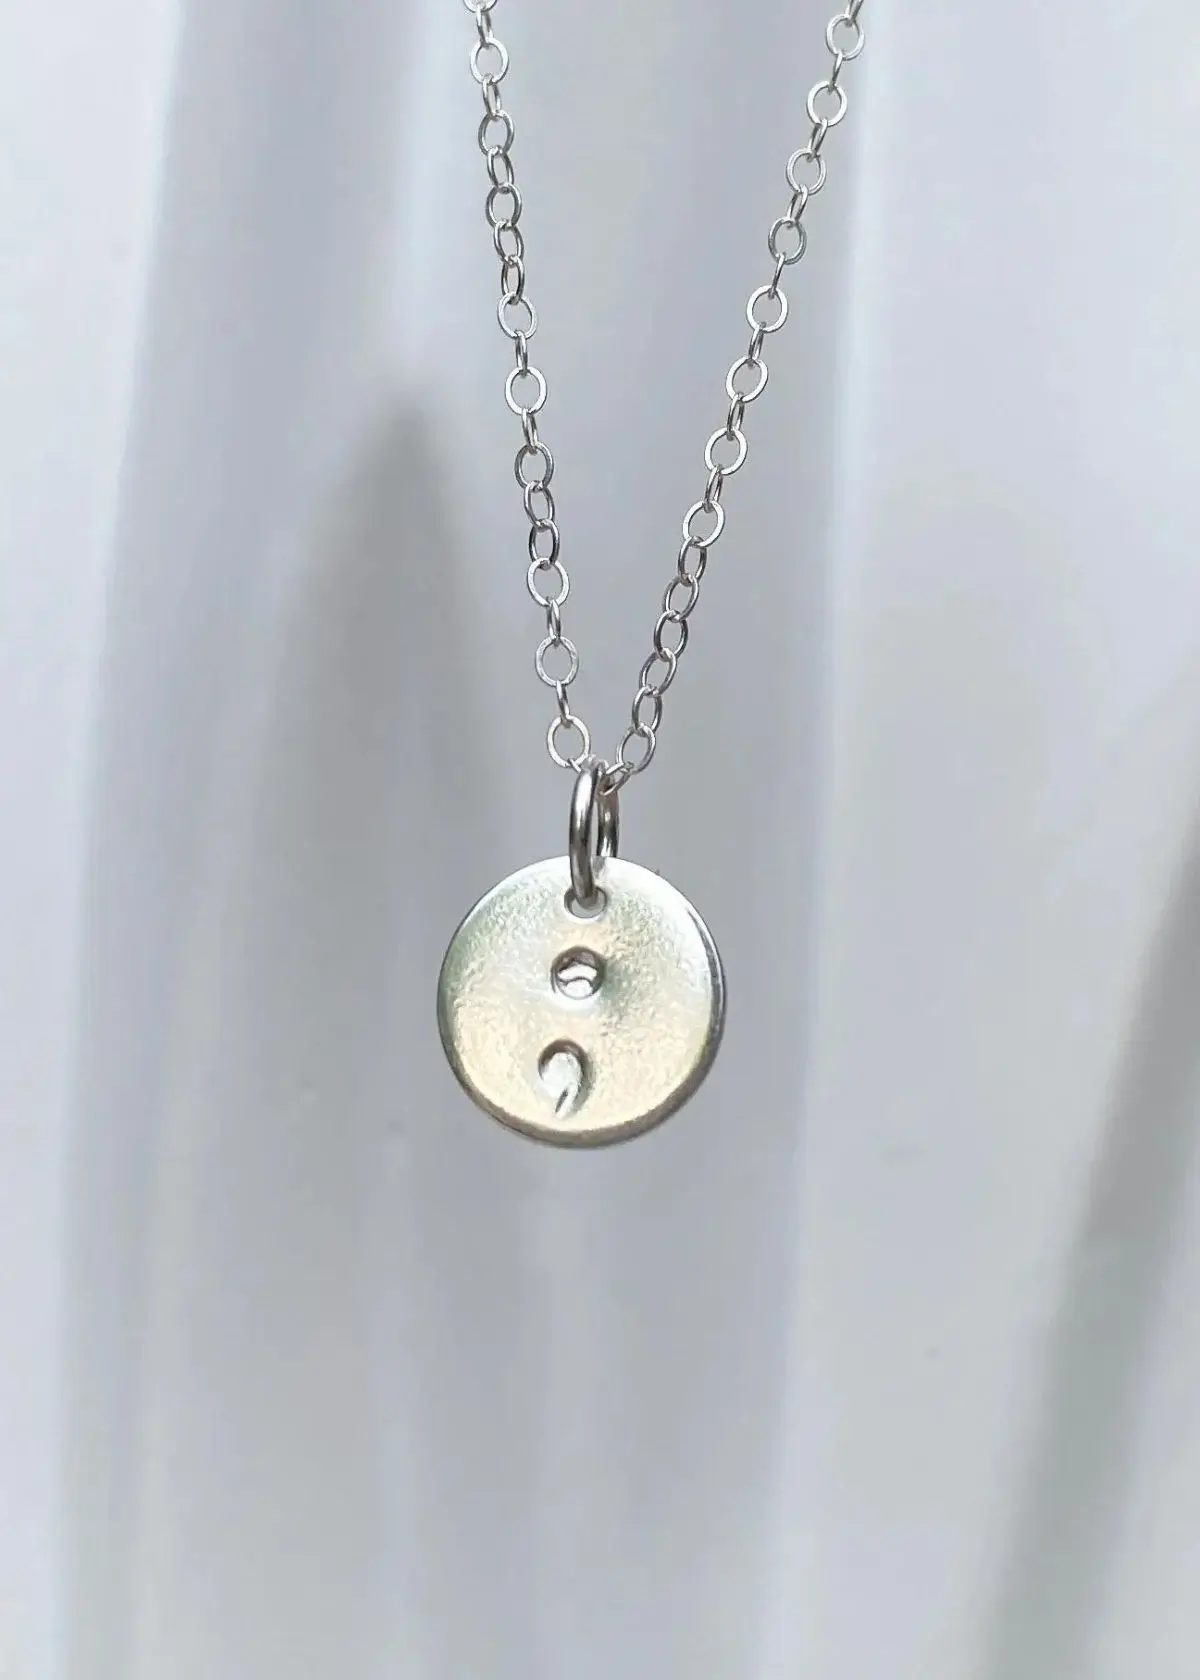 What does Semicolon Mean in Necklace?